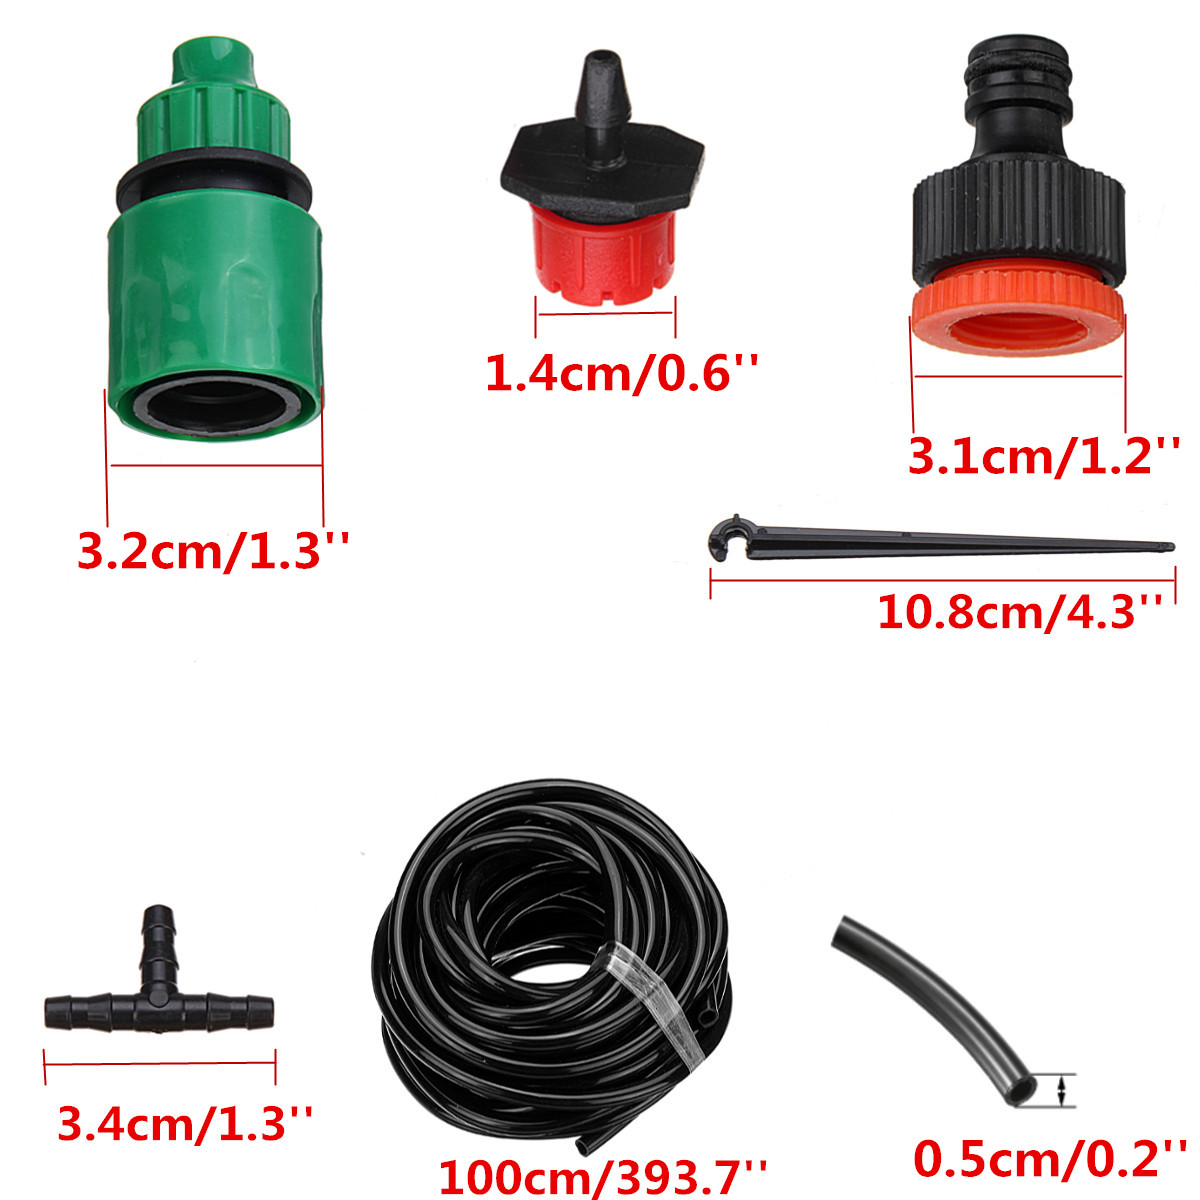 47PCS-Drip-Irrigation-Greenhouse-Garden-Plant-Watering-System-Hose-Kits-Adjusted-1518267-9